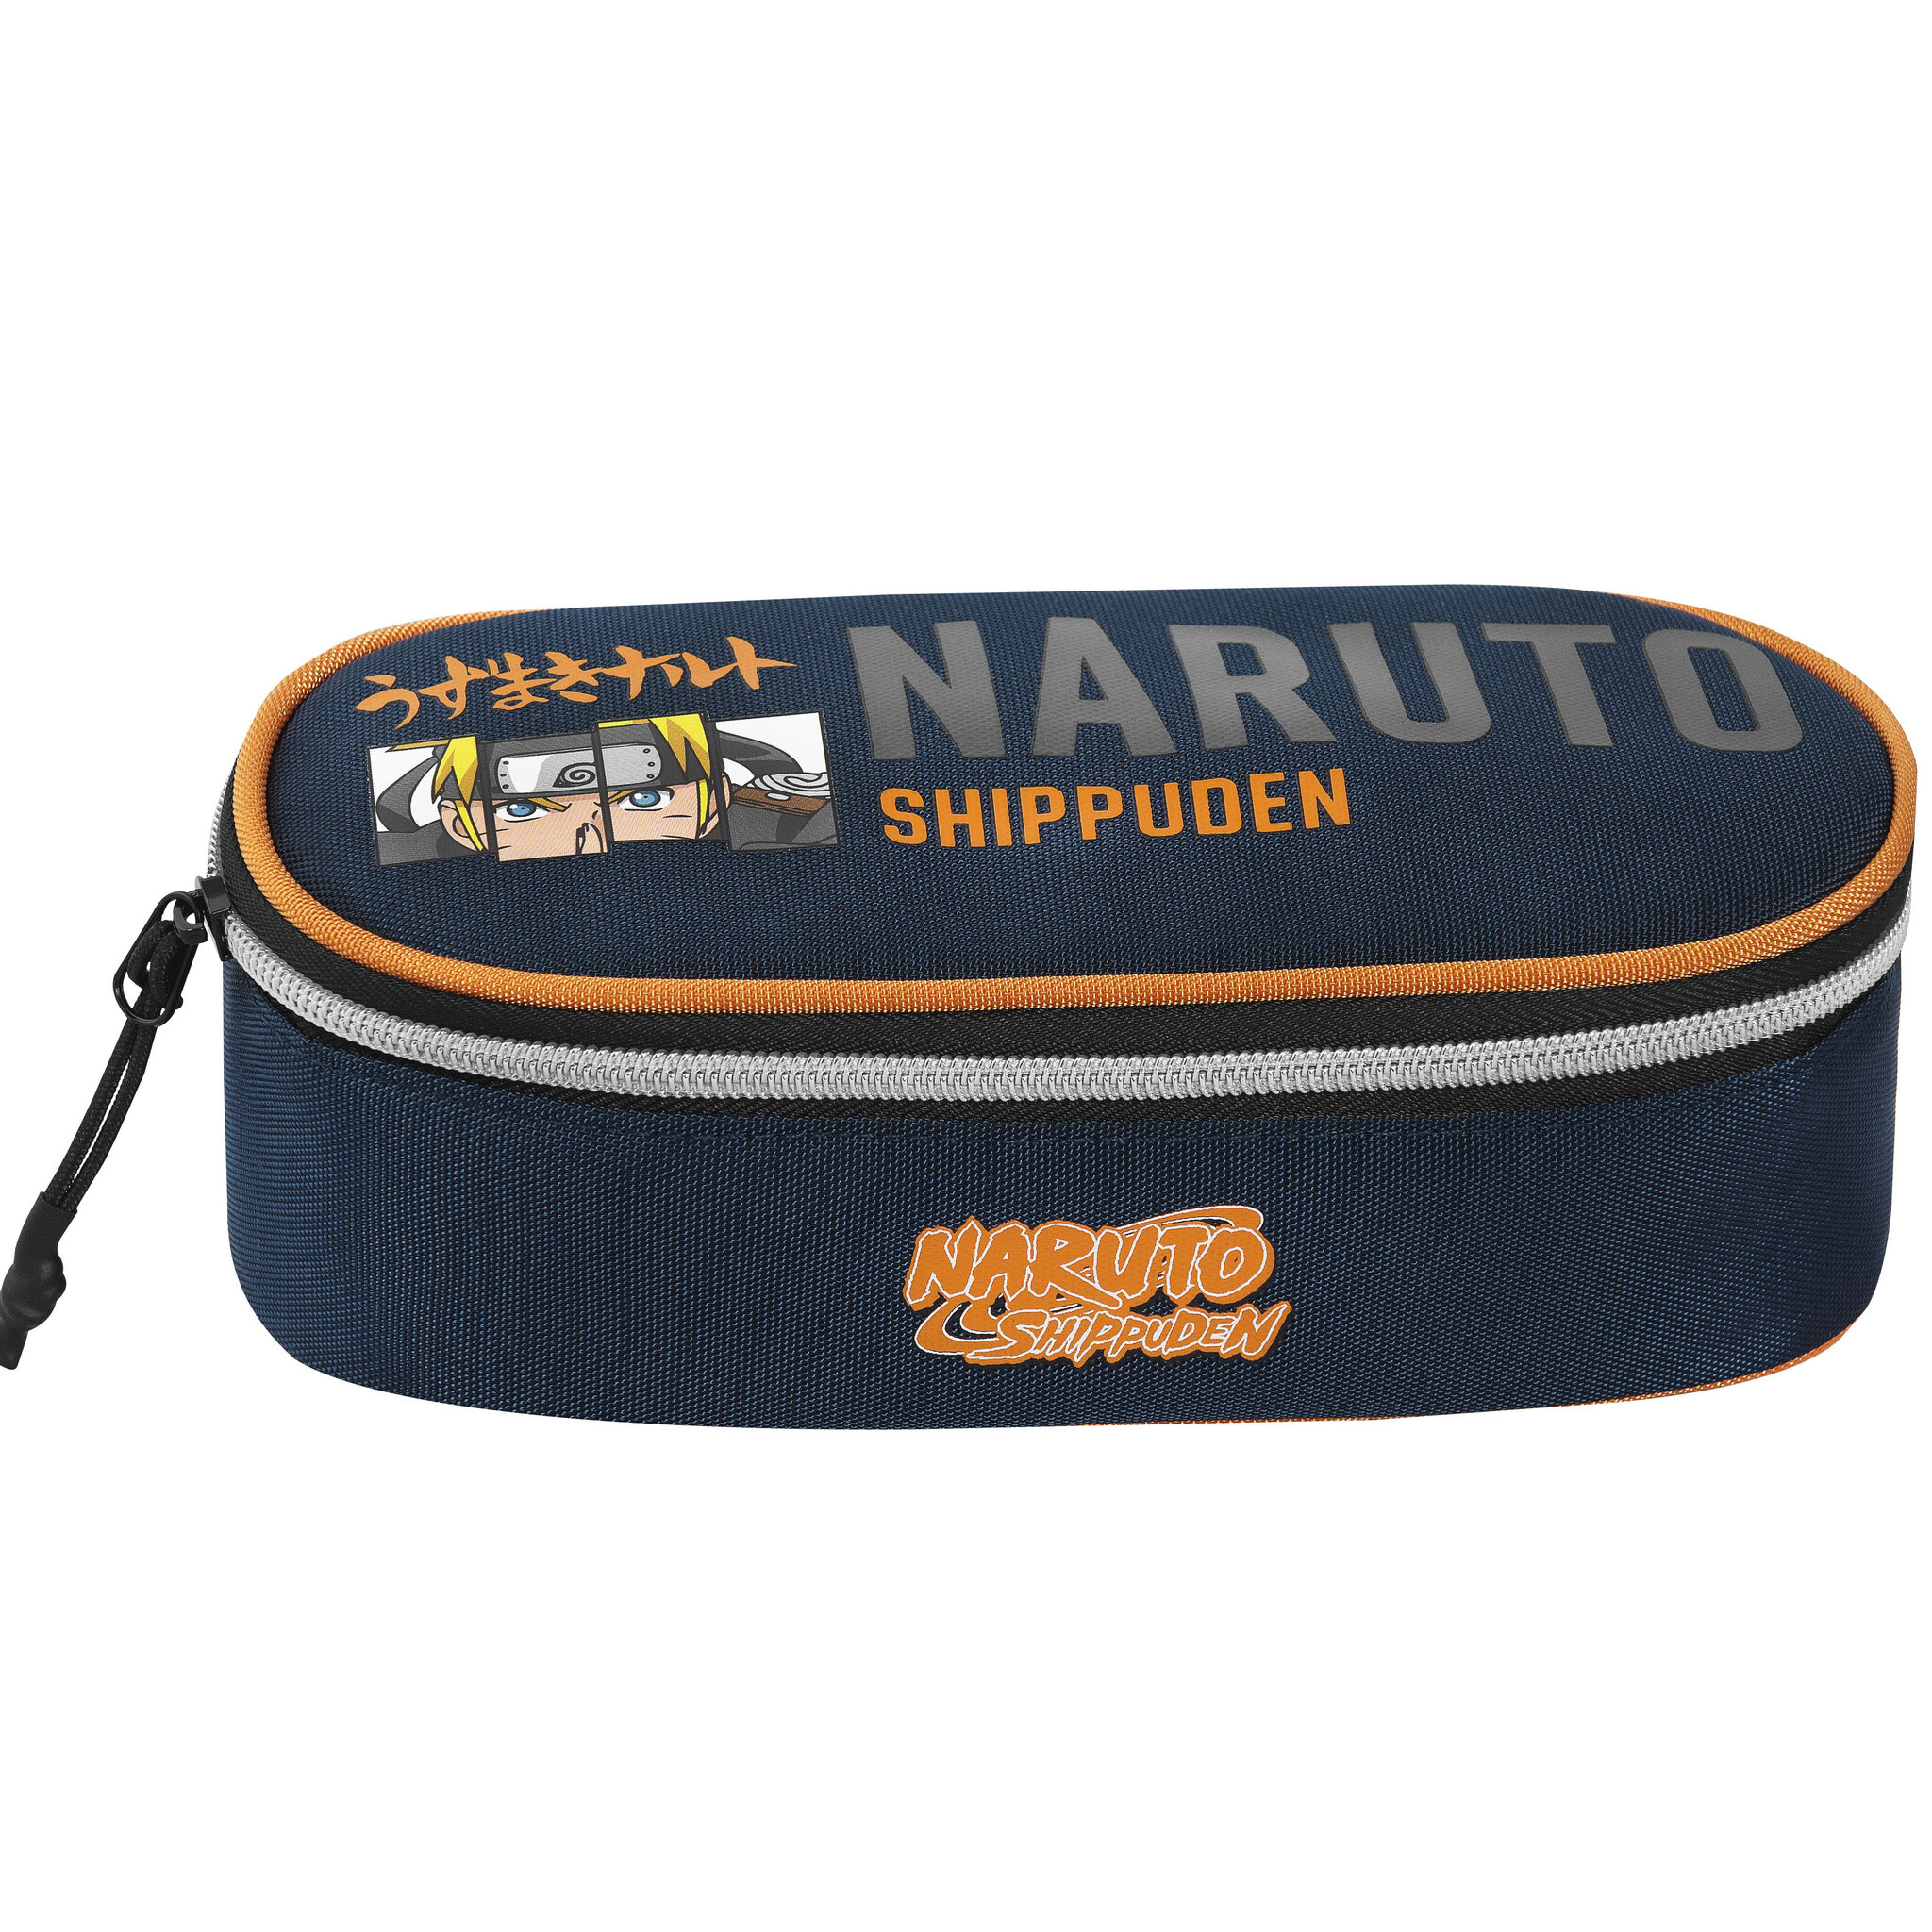 Naruto Pouch Oval, Shippuden - 22 x 9,5 x 7 cm - Polyester